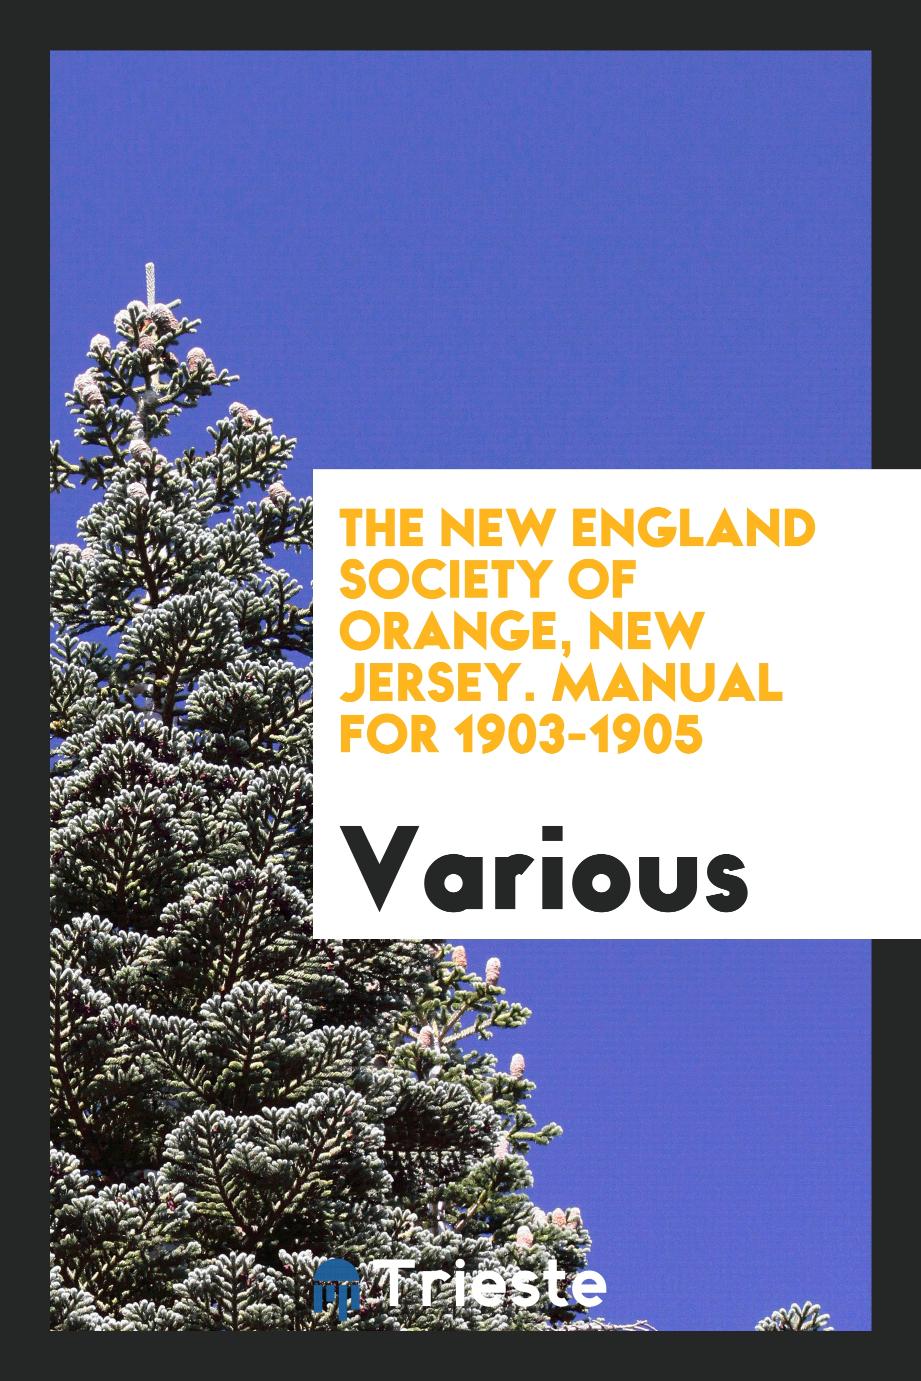 The new England society of orange, New Jersey. Manual for 1903-1905